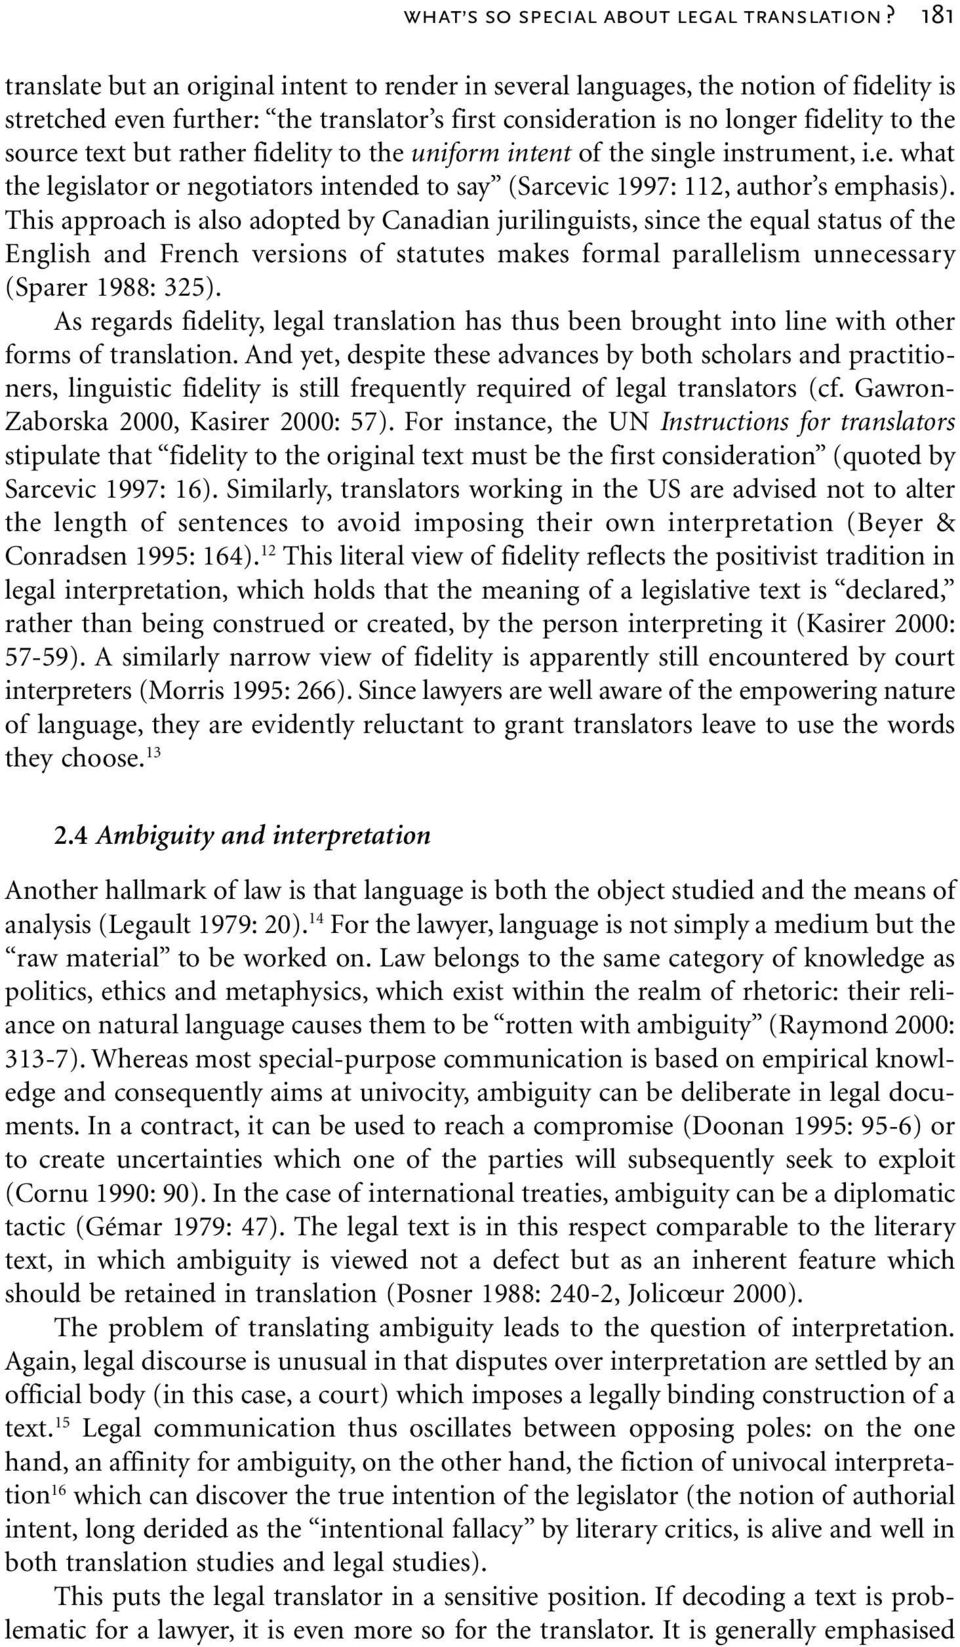 but rather fidelity to the uniform intent of the single instrument, i.e. what the legislator or negotiators intended to say (Sarcevic 1997: 112, author s emphasis).